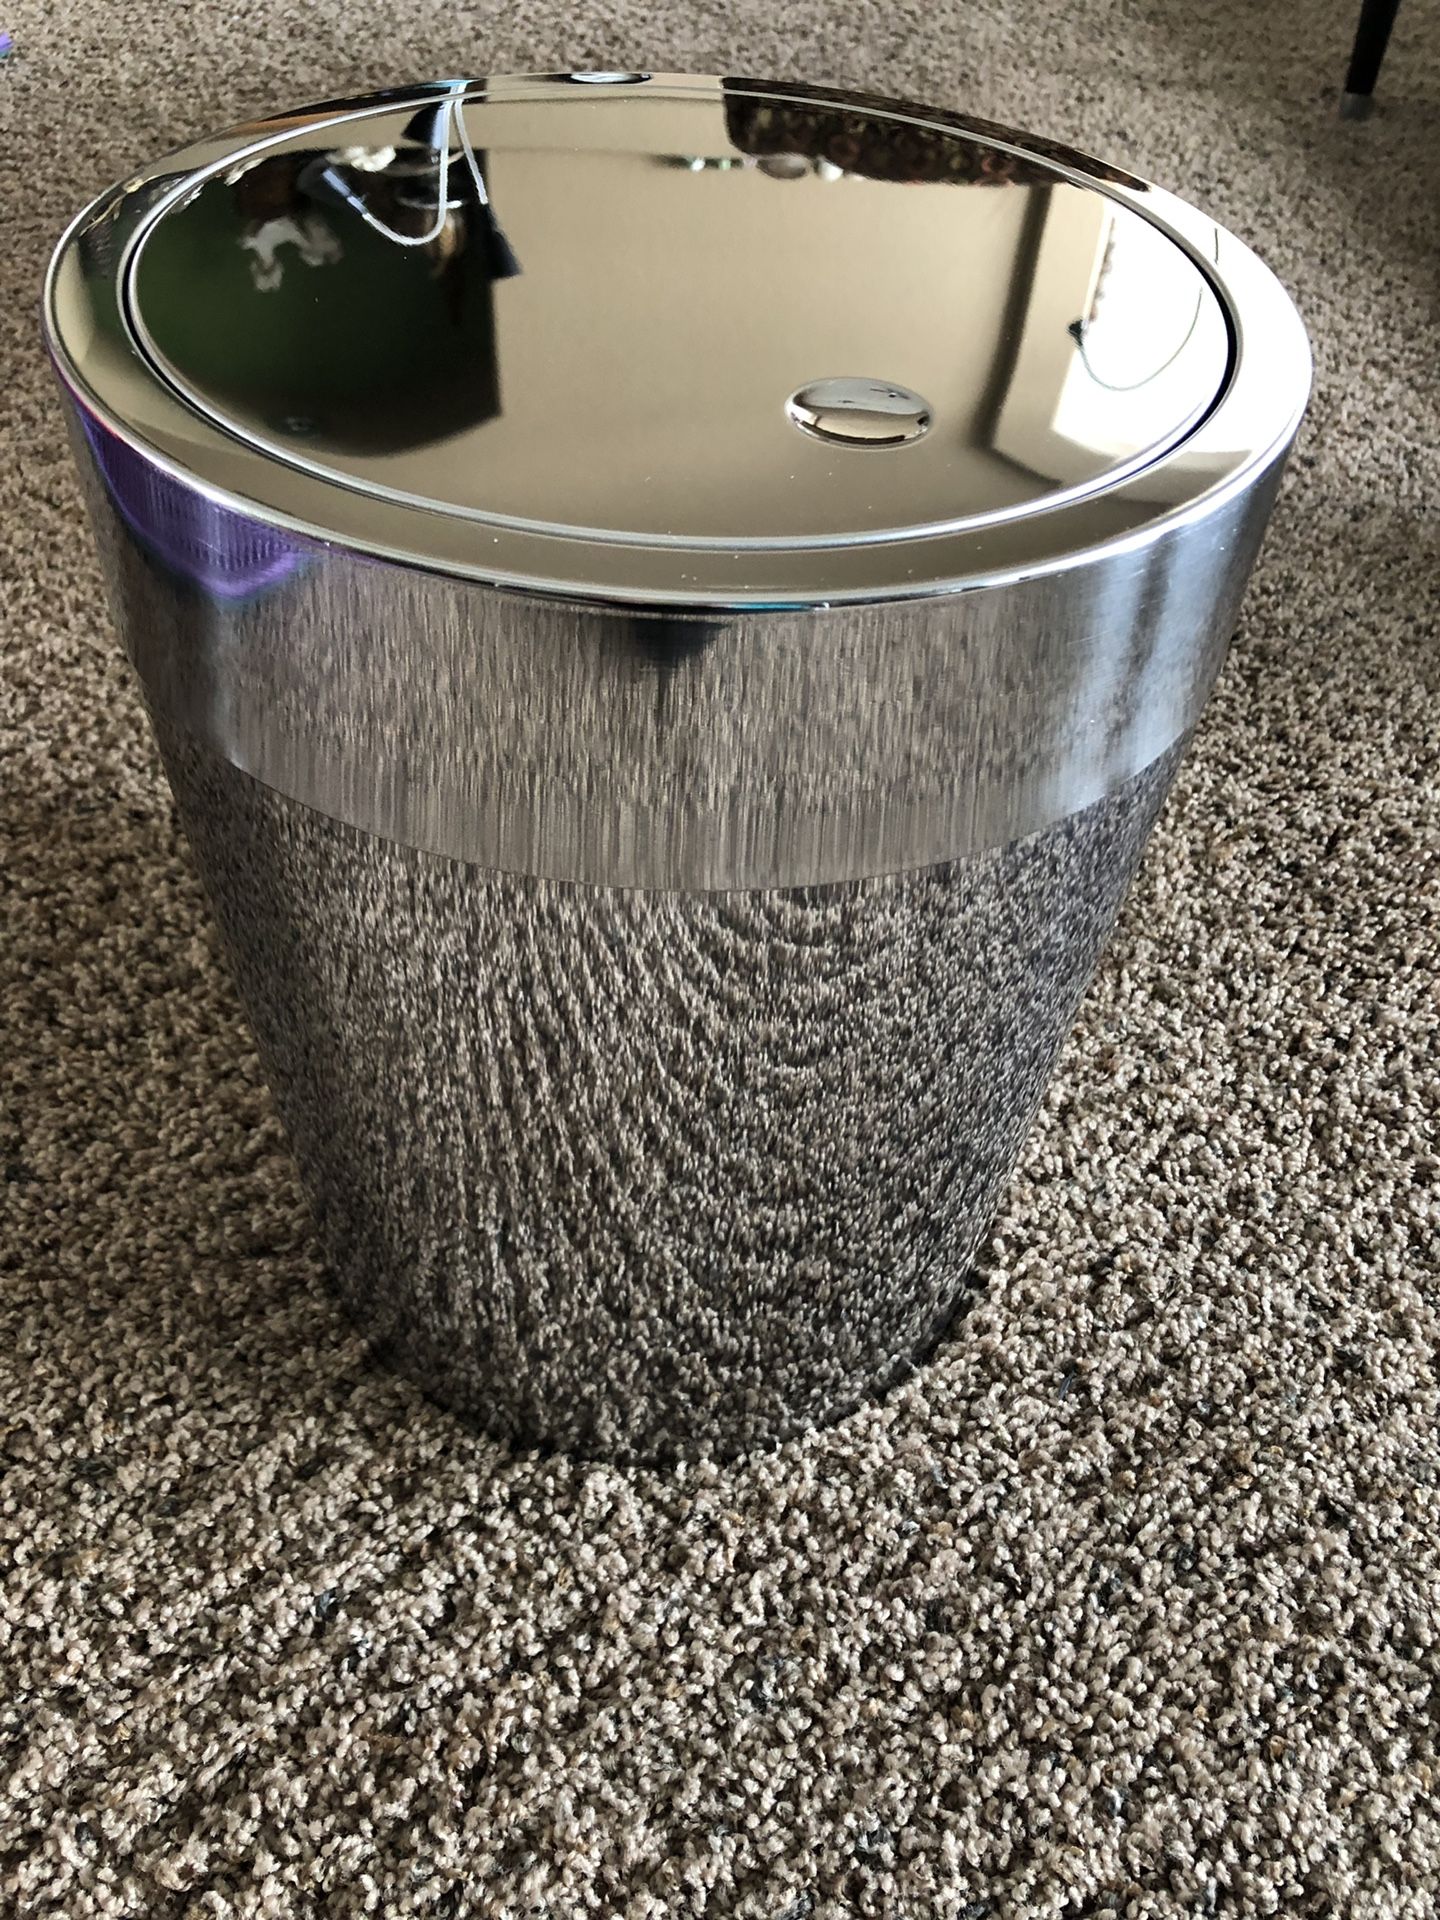 SULTEN Step trash can, stainless steel, 13 gallon - IKEA